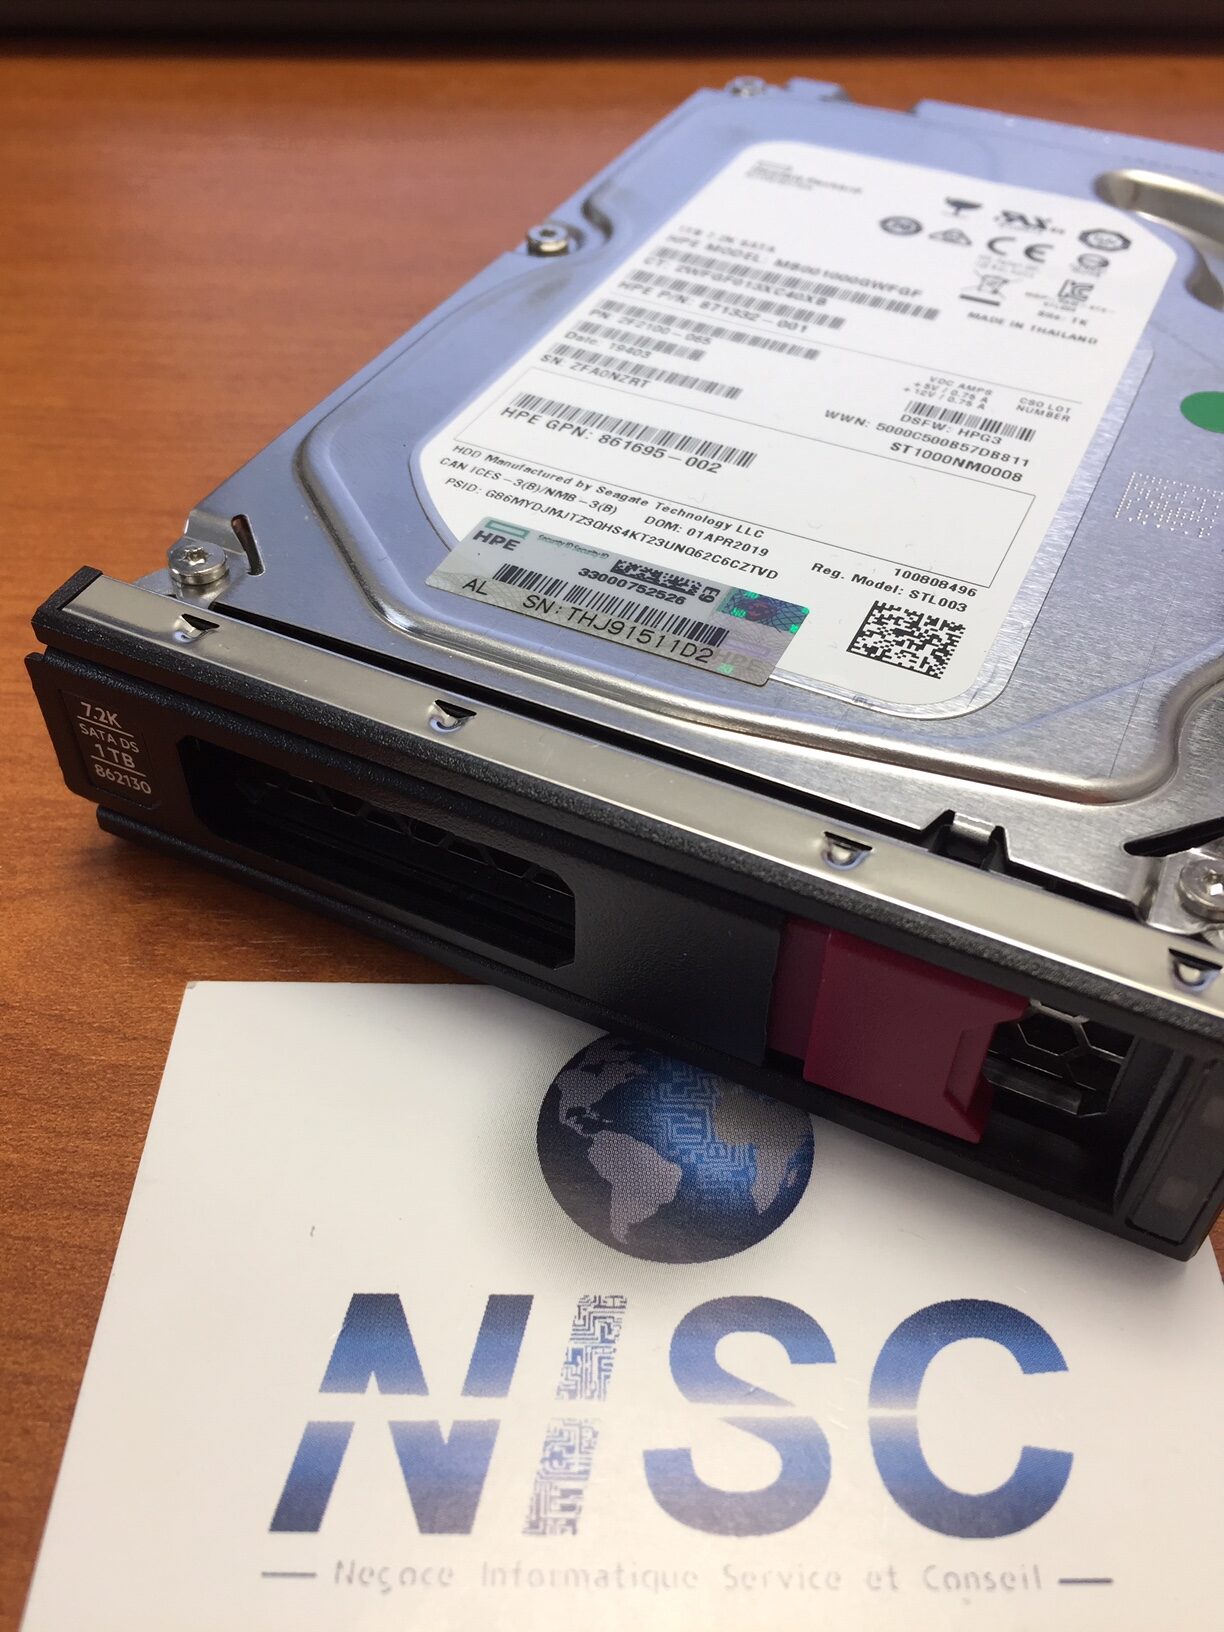 HGST – HDD 4To SATA 7.2K – Serveurs d'occasion Dell et HP